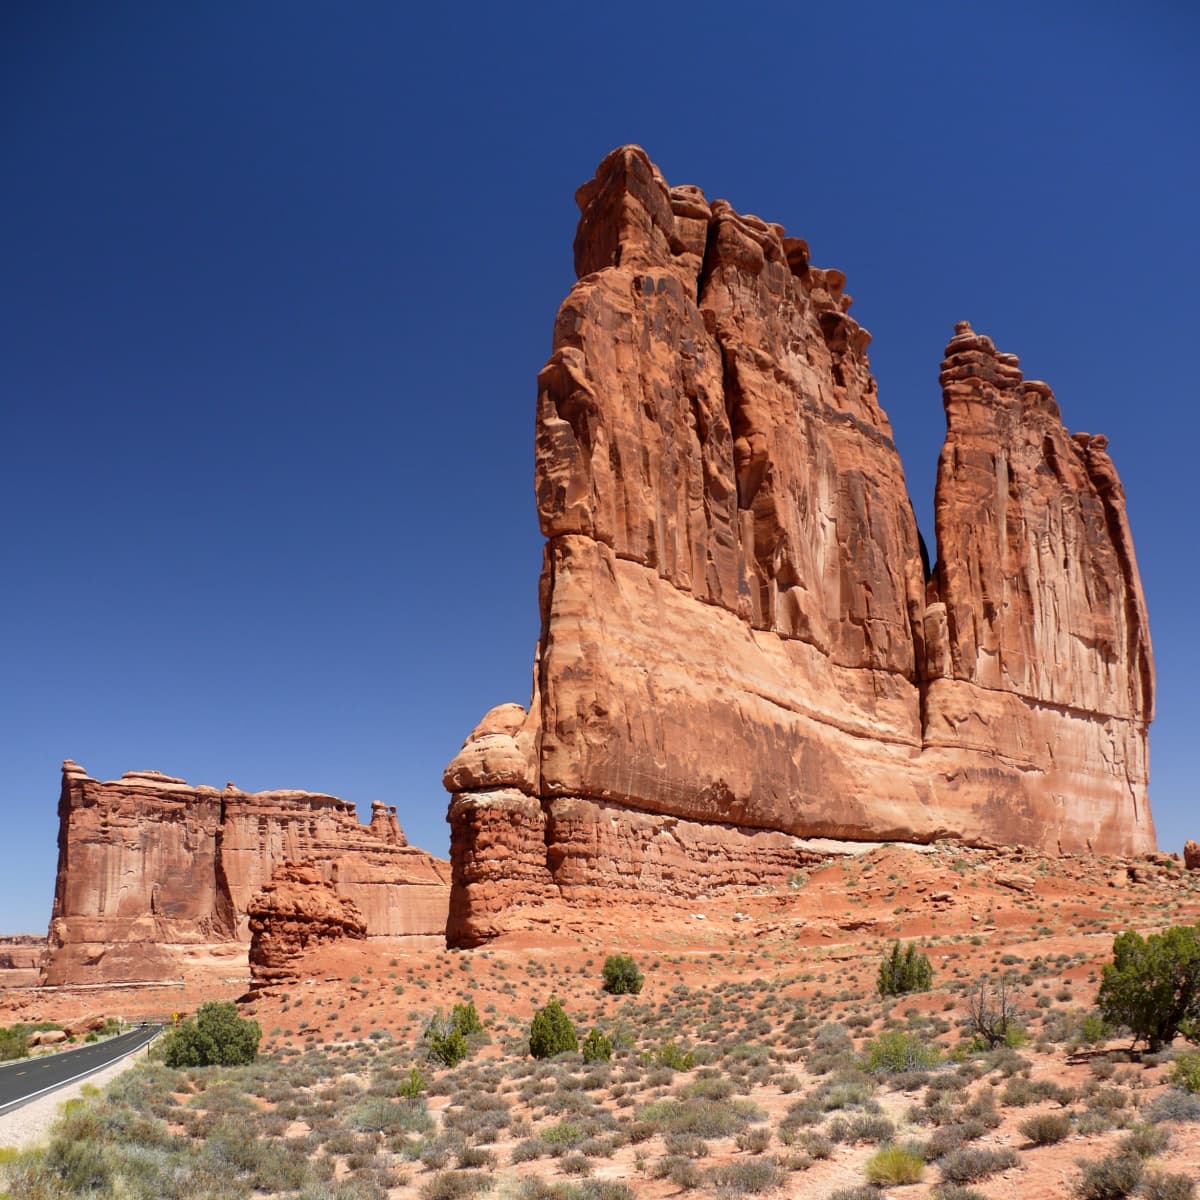 The Courthouse Tower, a tall, multi-pillared sandstone formation.